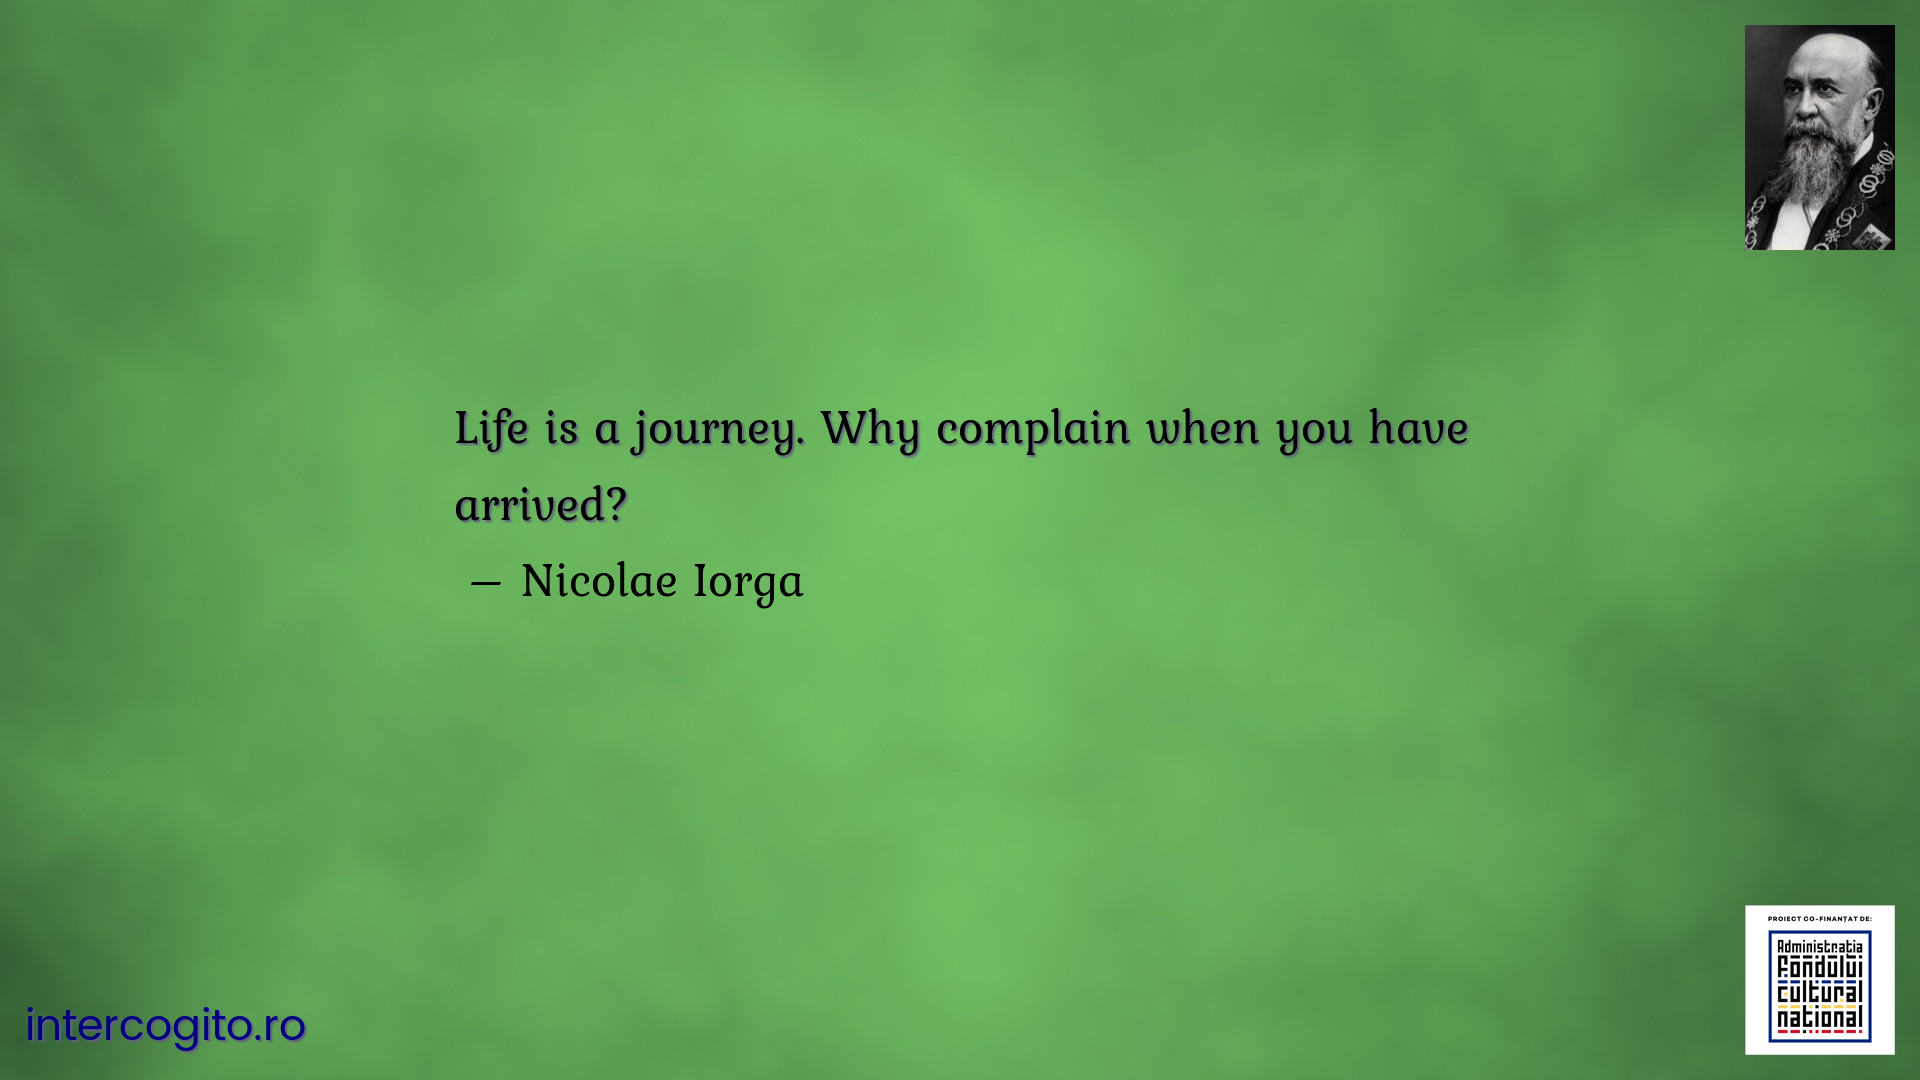 Life is a journey. Why complain when you have arrived?